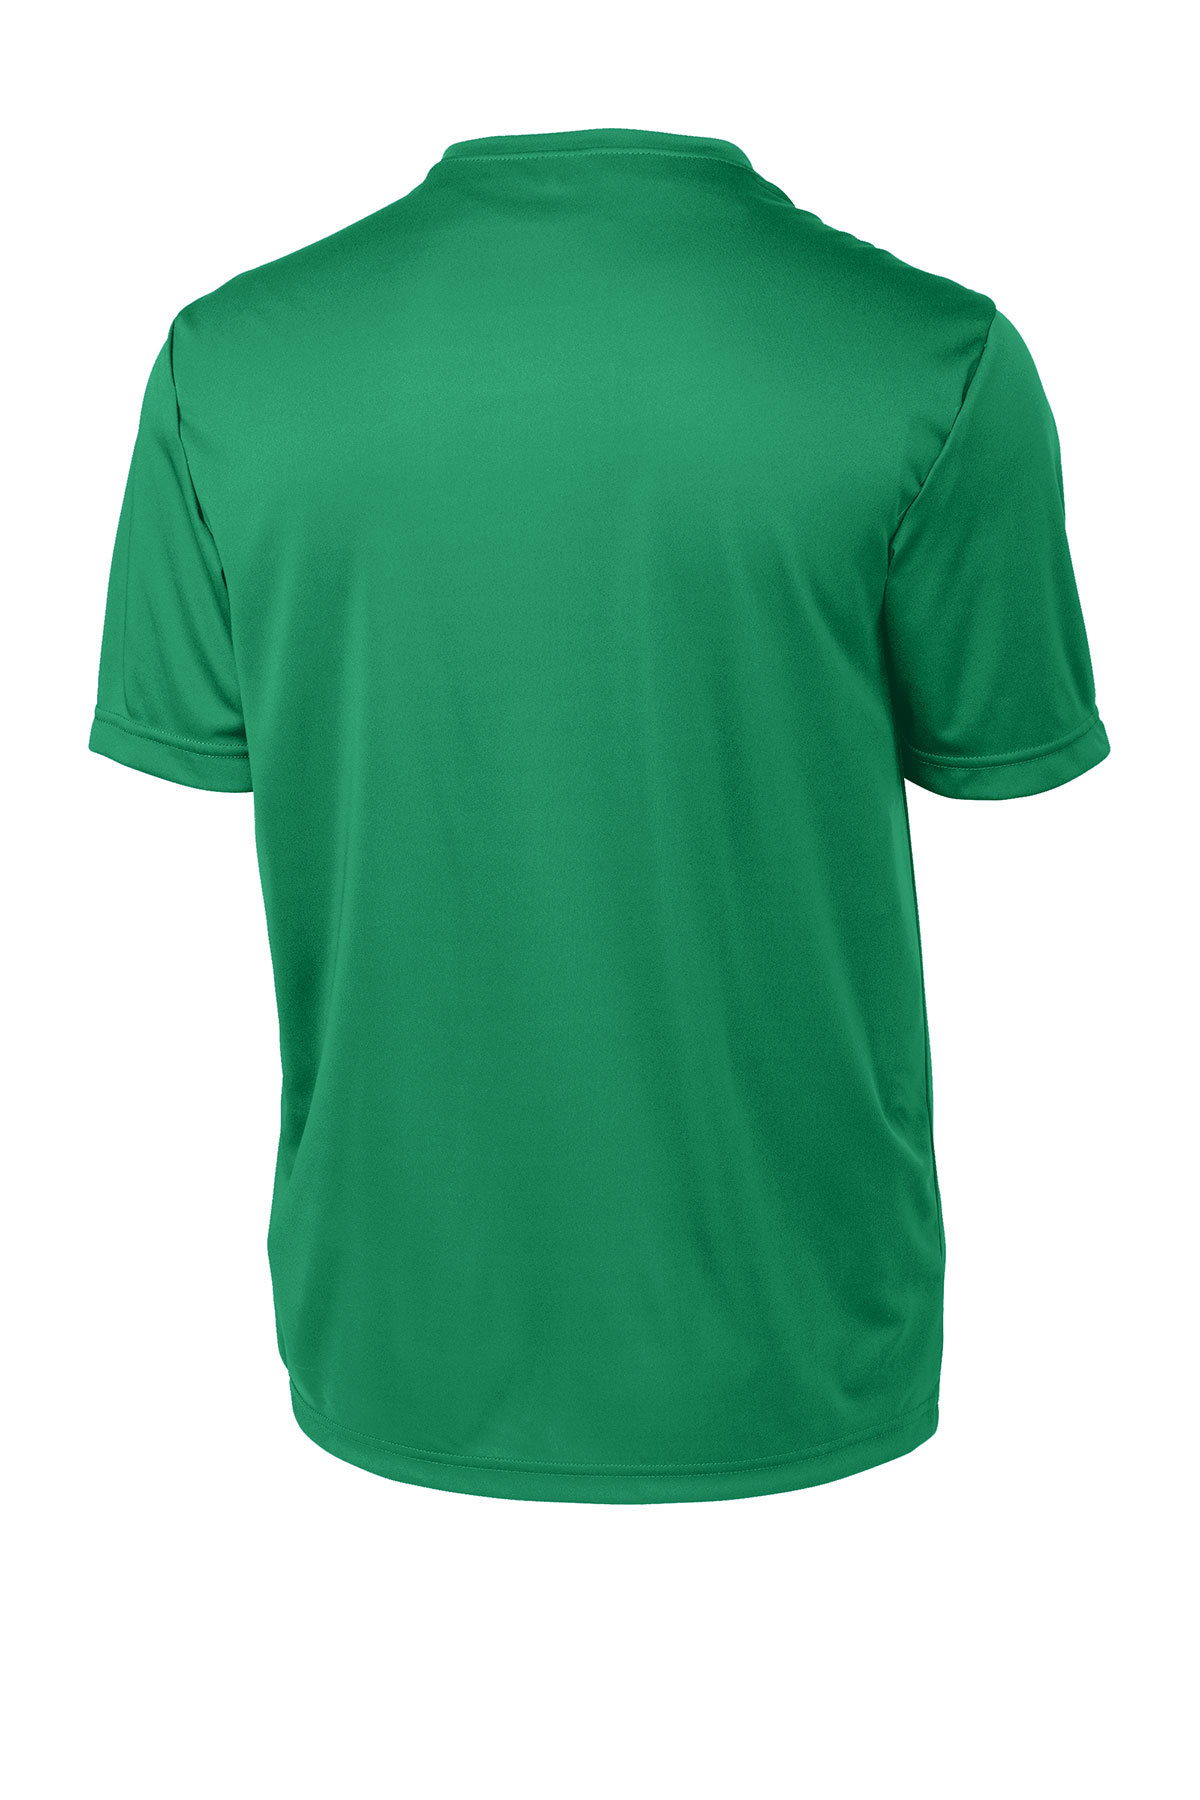 Sport-Tek Tall PosiCharge Competitor™ Tee | Product | Company Casuals